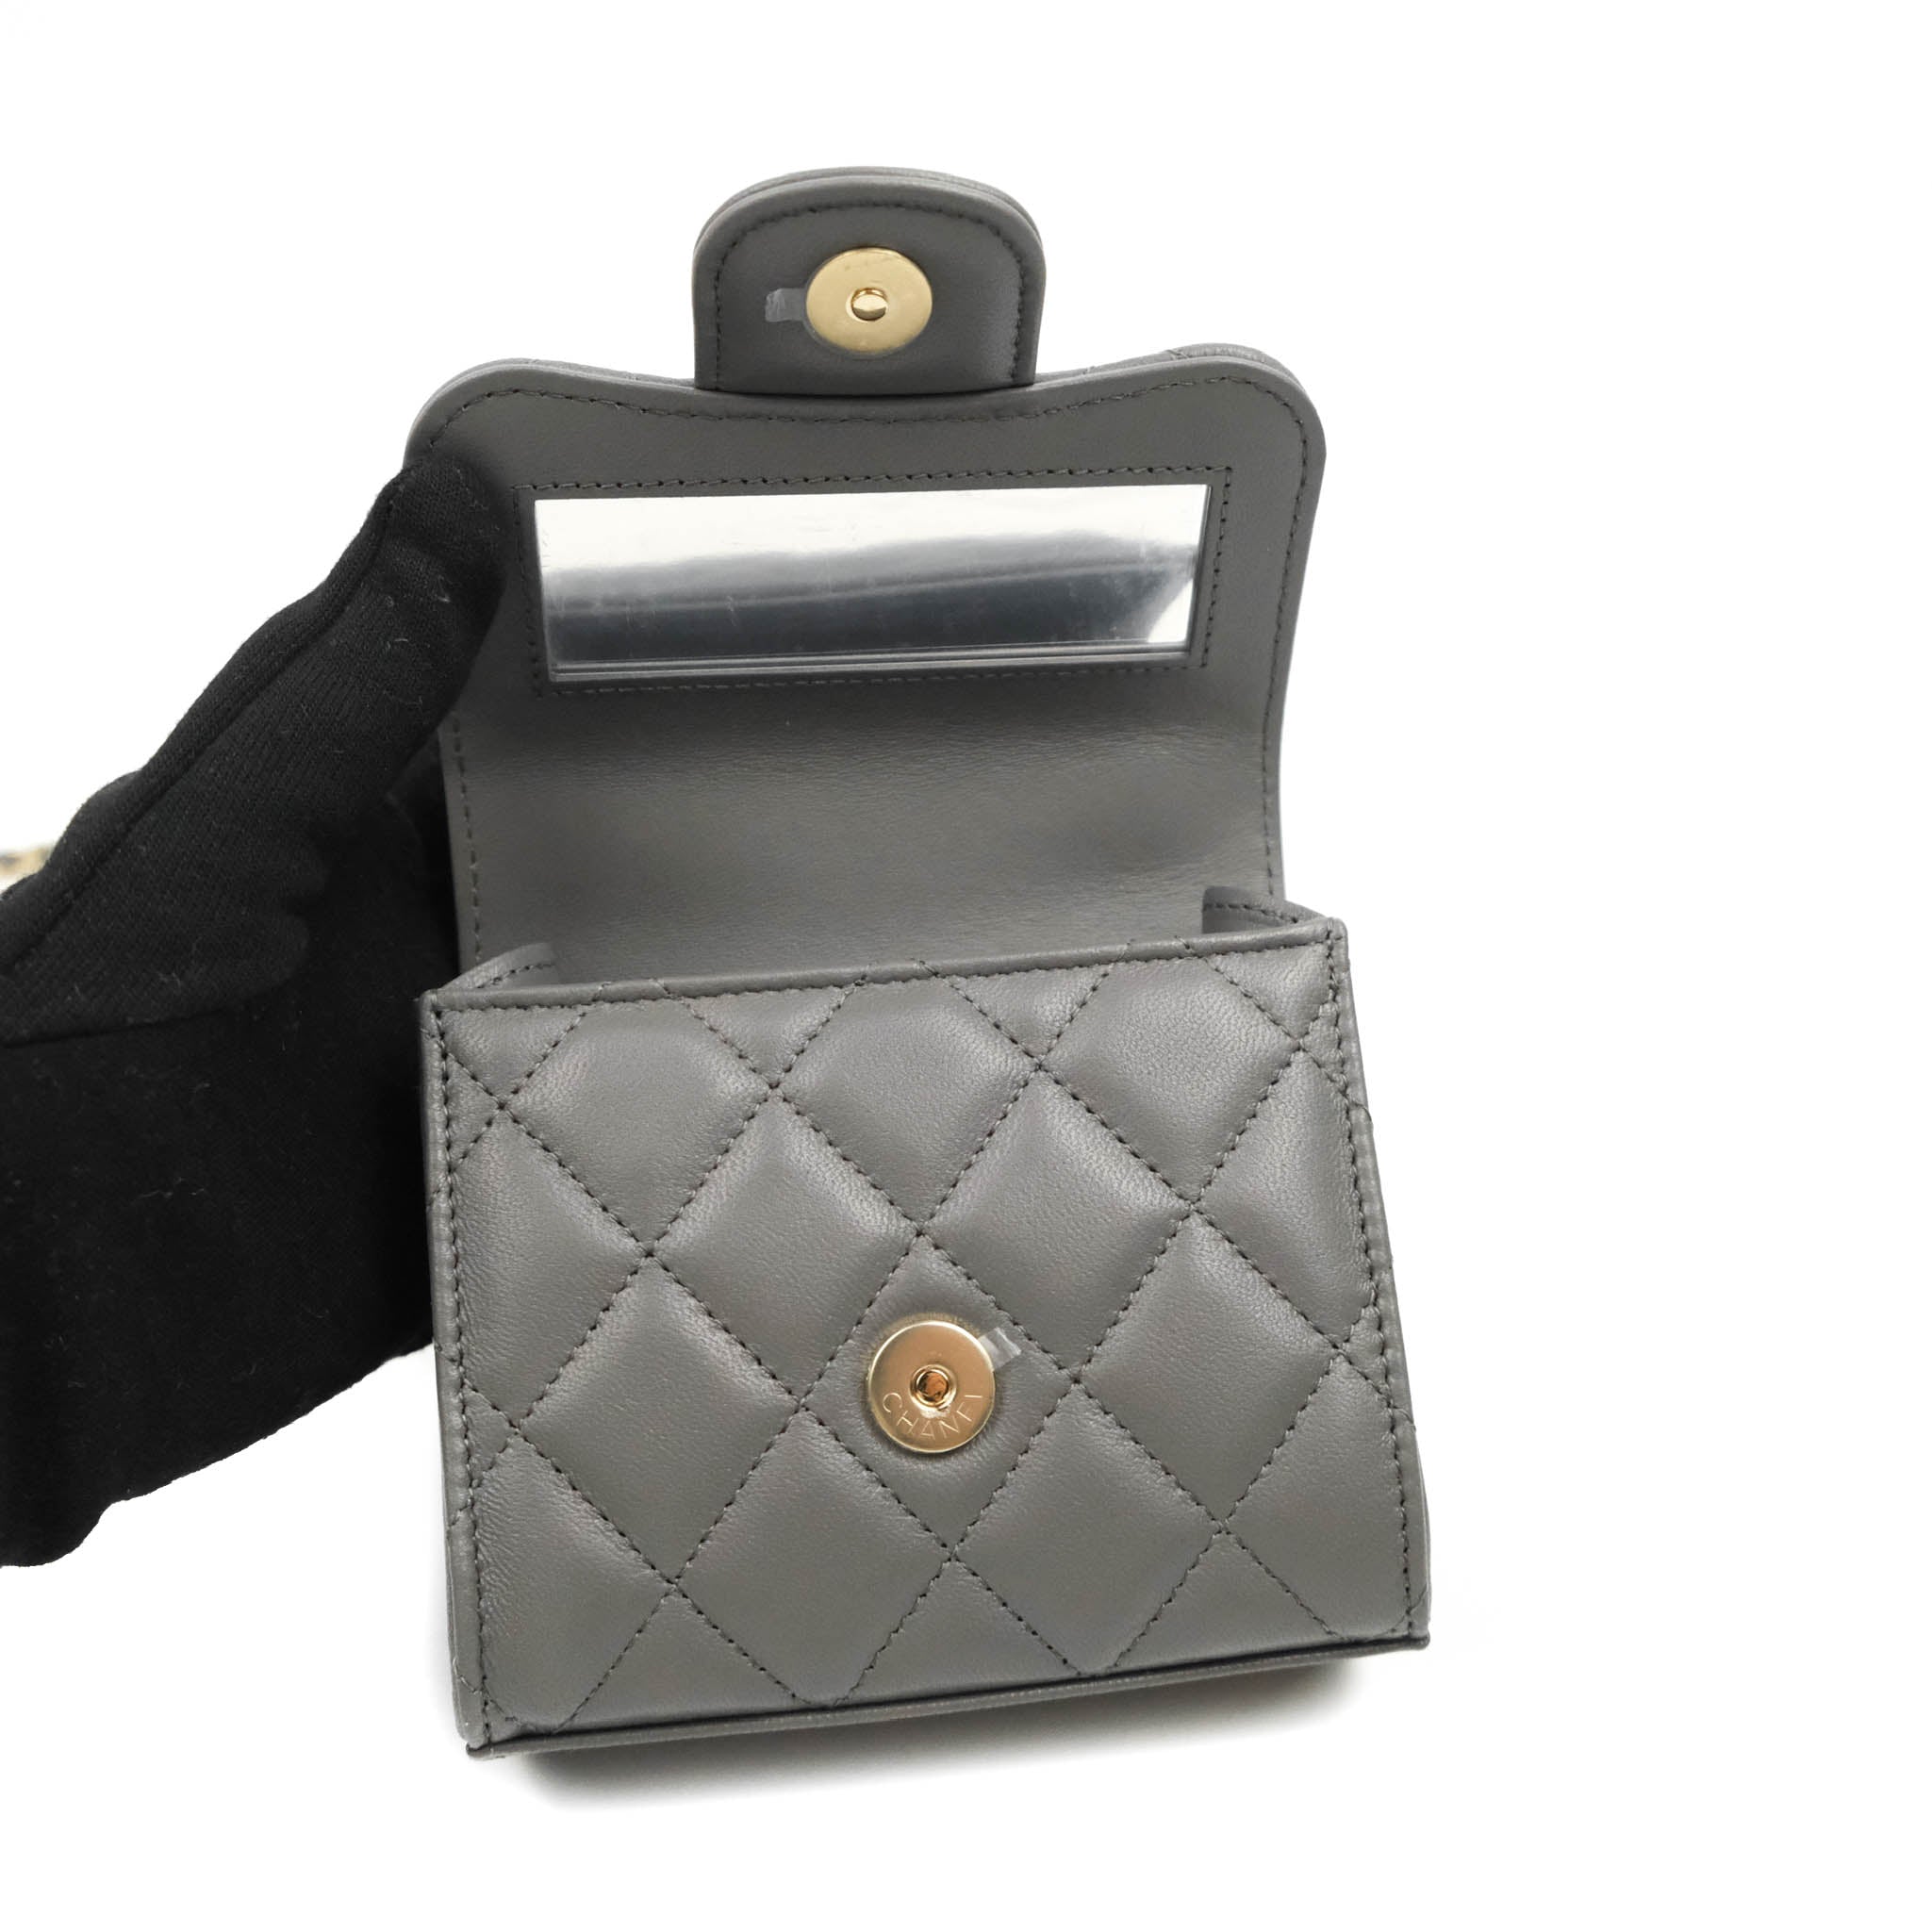 CHANEL Lambskin Quilted Top Handle Flap Coin Purse With Chain Grey